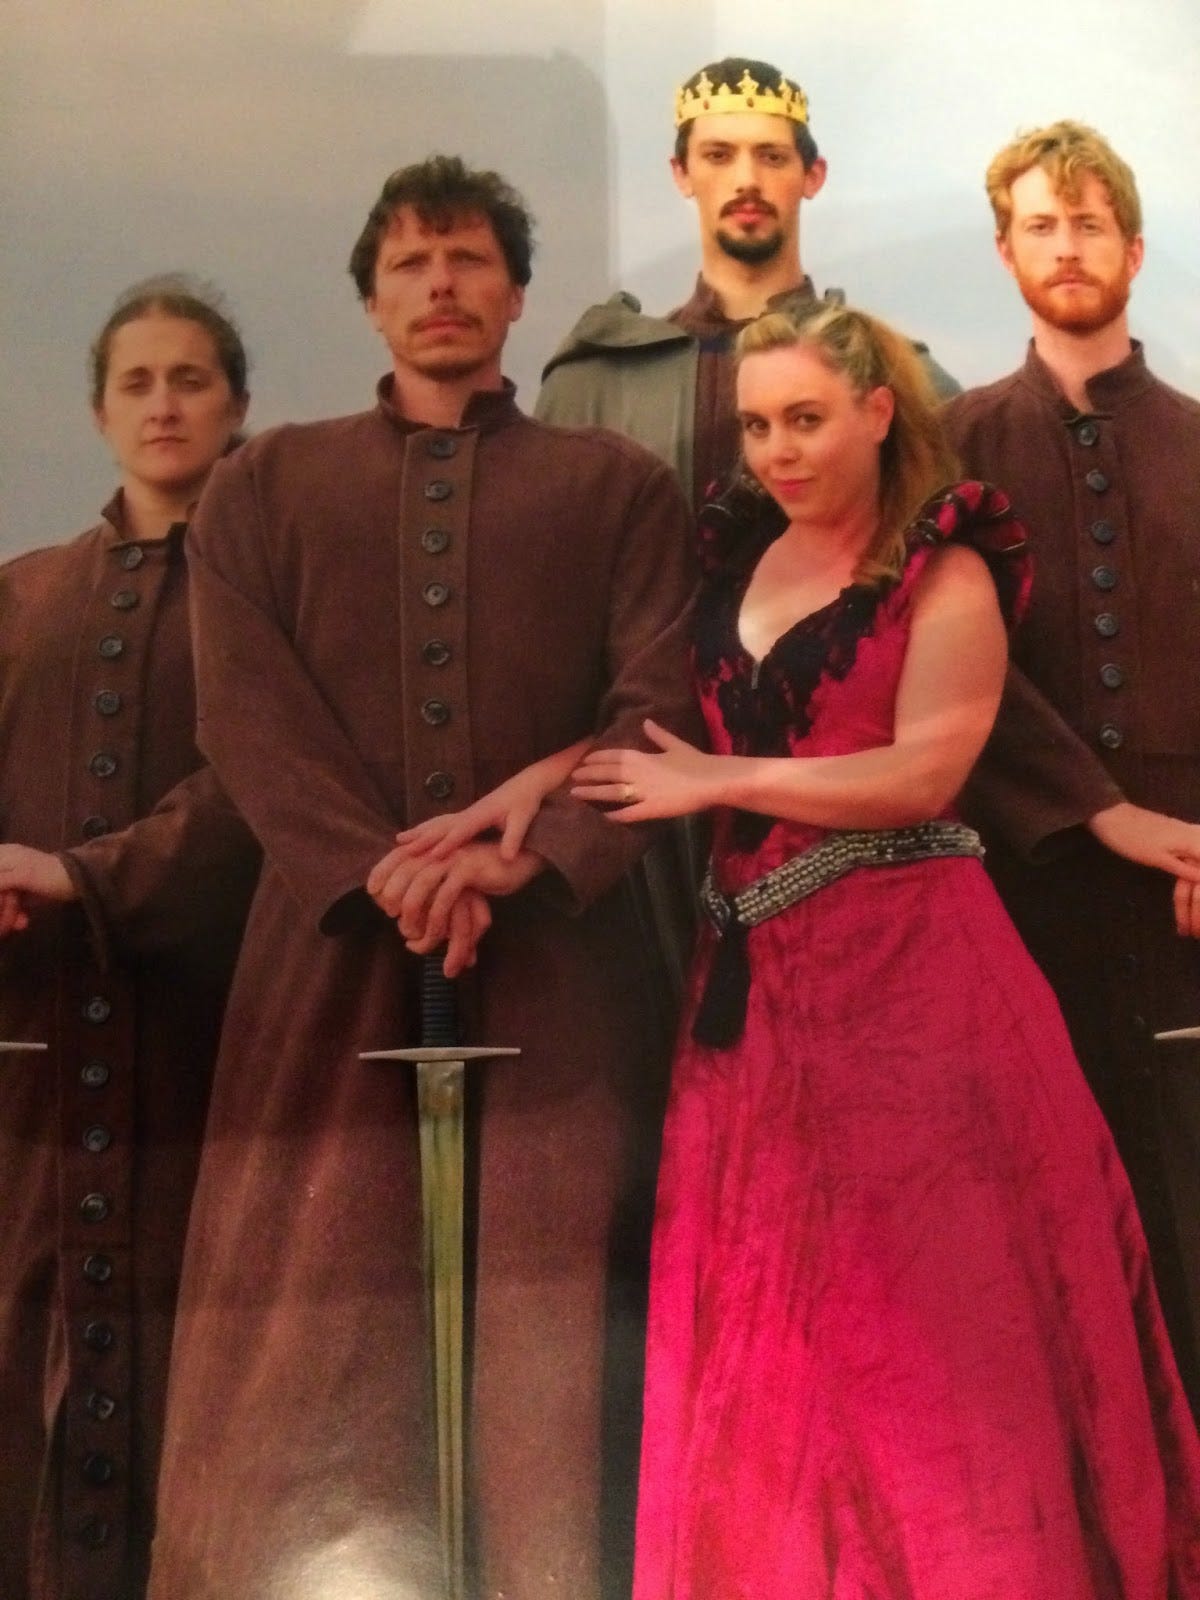 Scene from "Macbeth" by William Shakespeare performed by Illyria Theatre